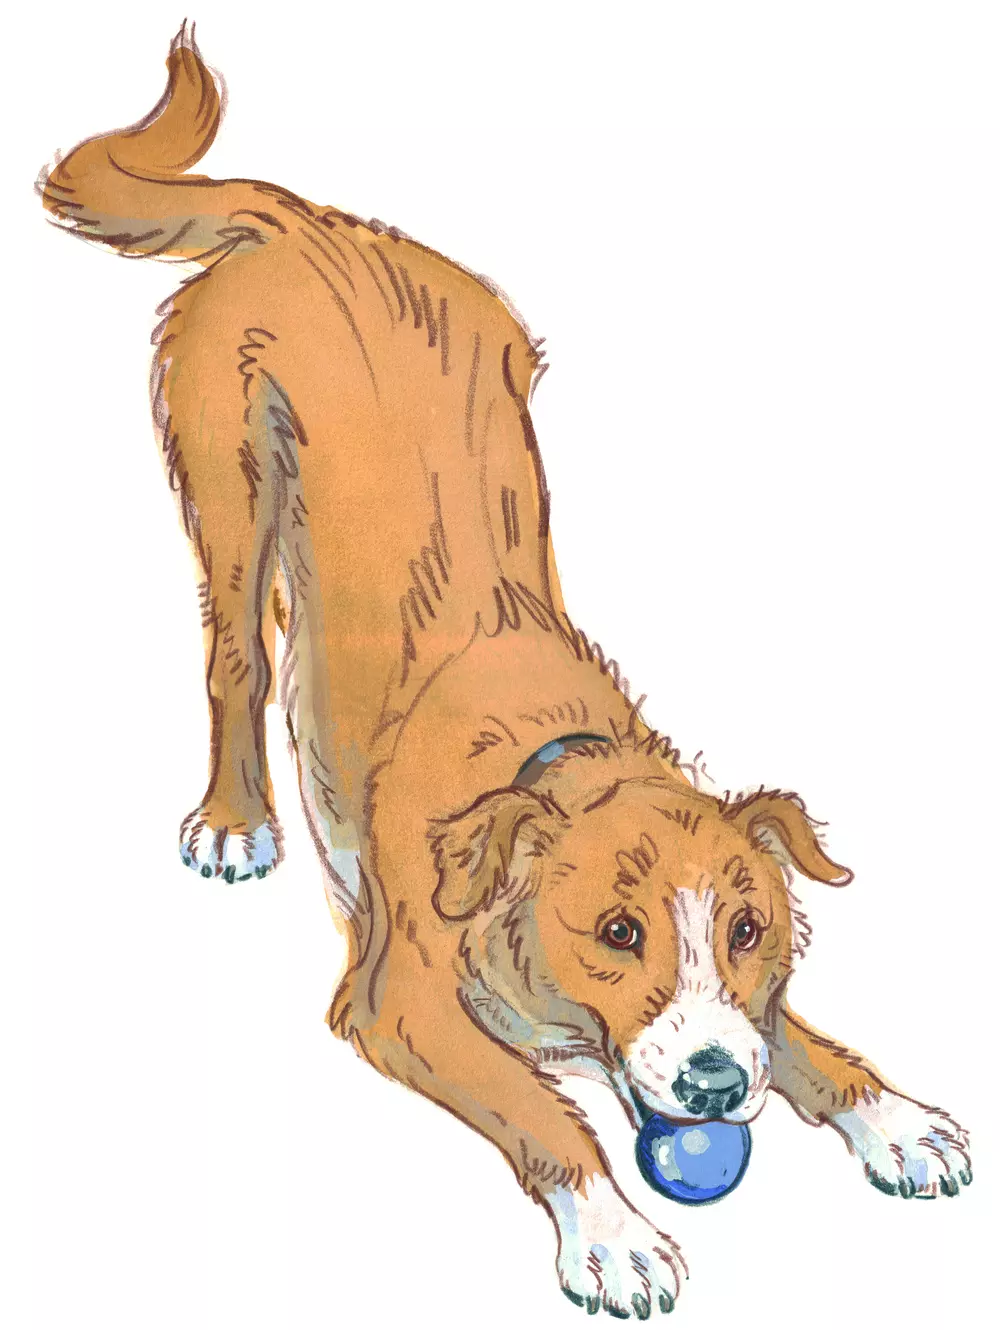 Drawing of a dog in a play bow pose looking happy and ready to play